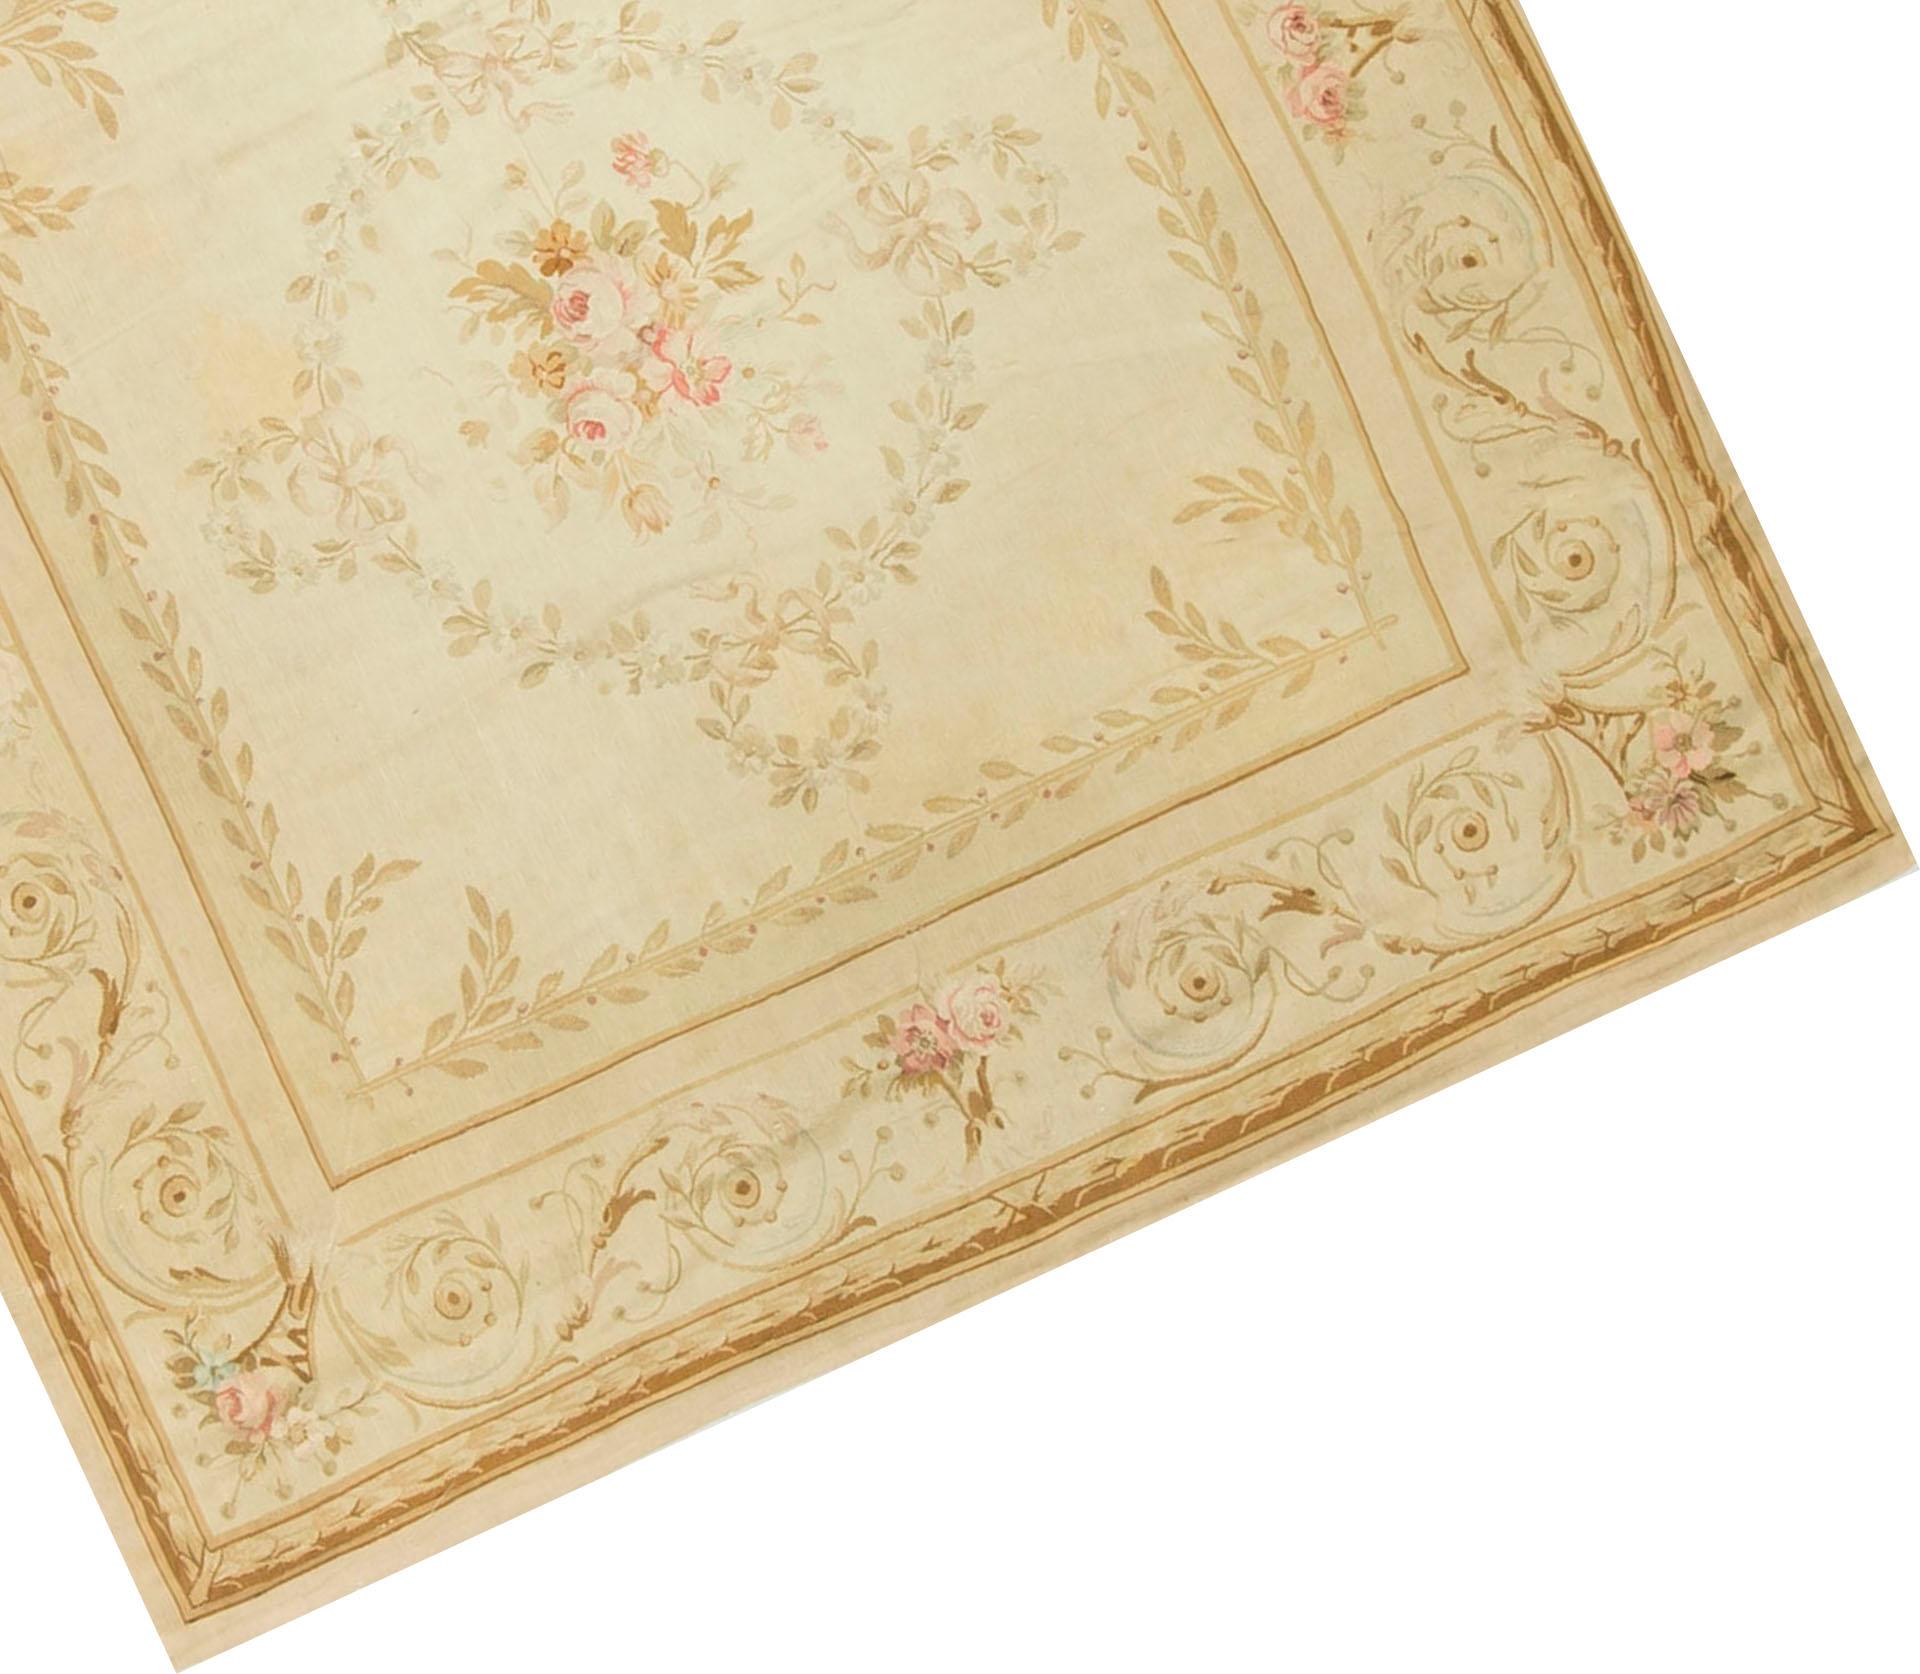 Antique Square French Aubusson Rug Carpet Circa 1890 7'10 x 8'5 In Good Condition For Sale In Secaucus, NJ